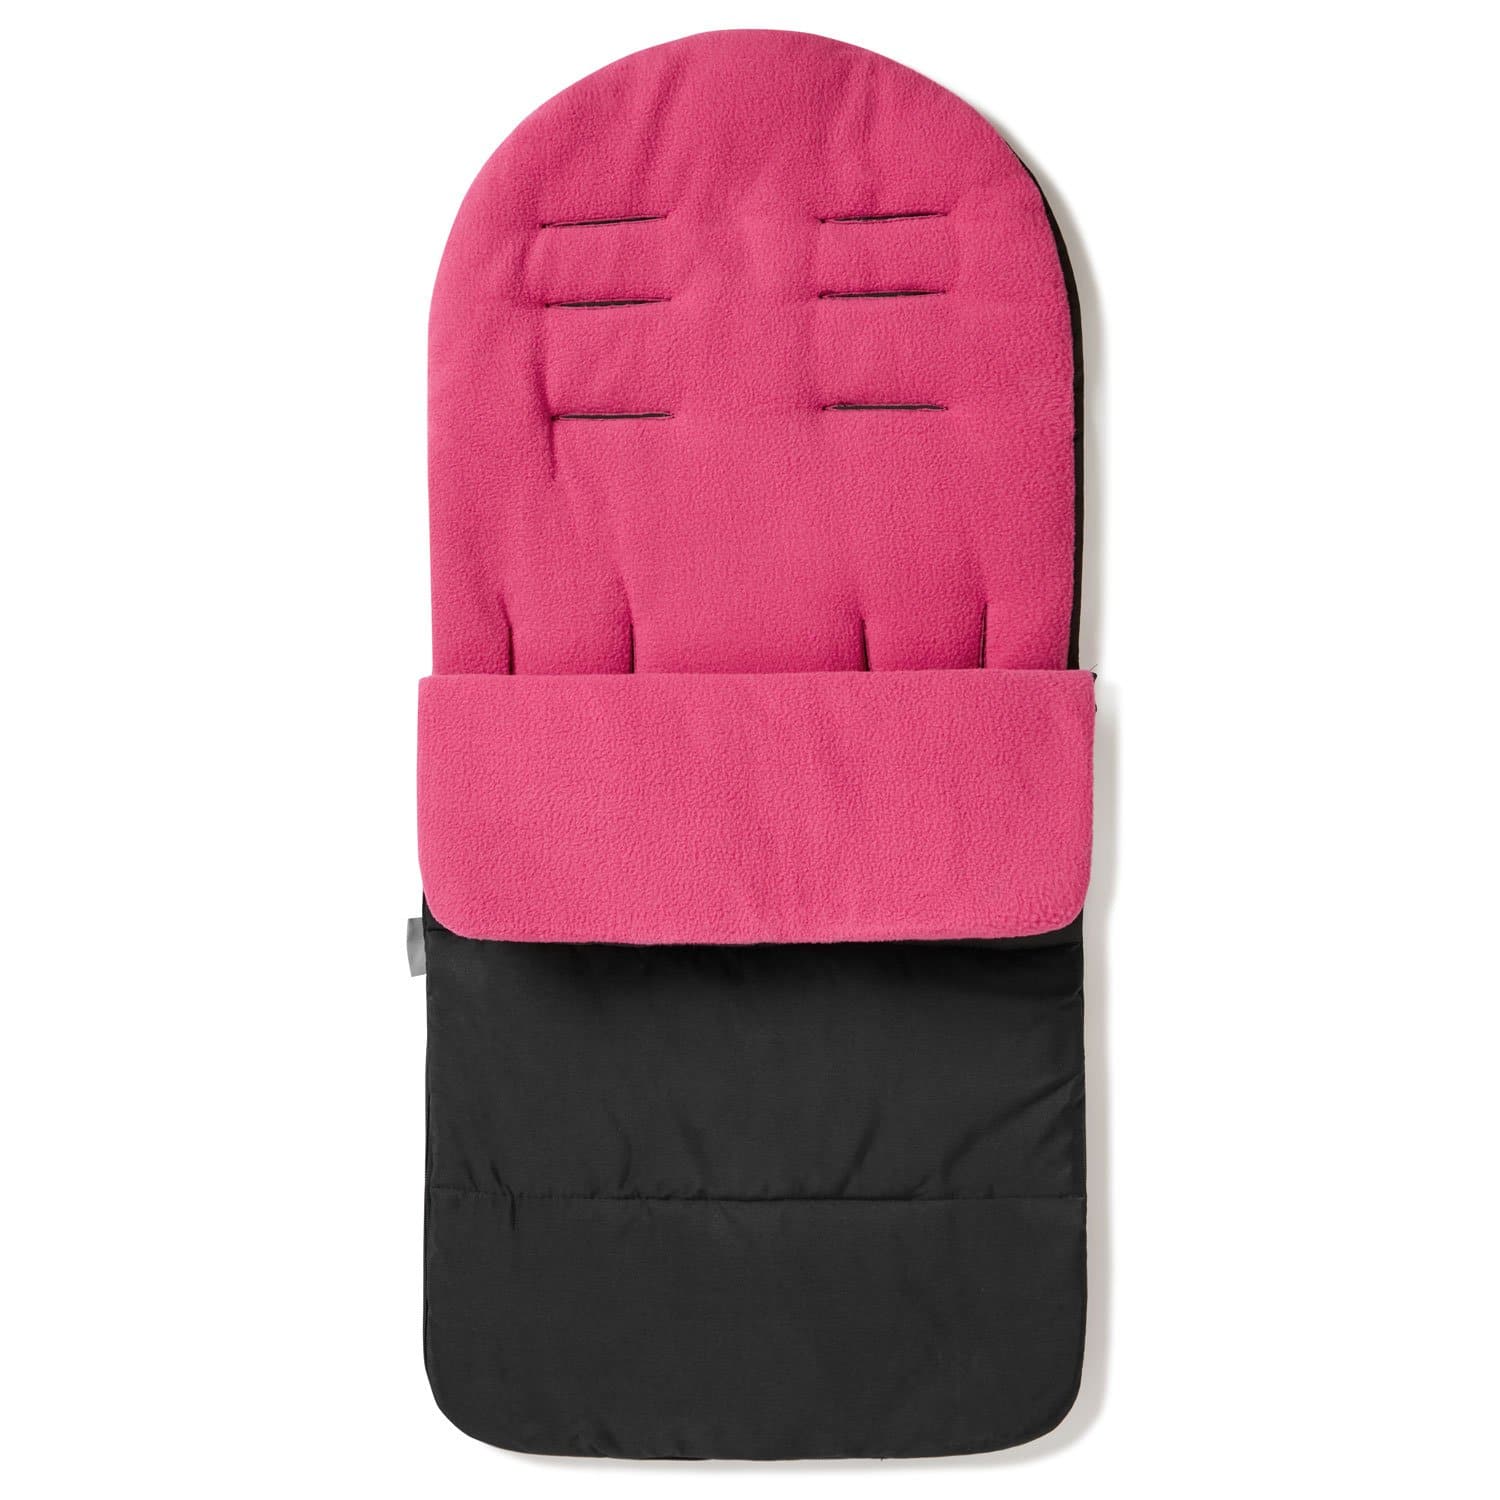 Premium Footmuff / Cosy Toes Compatible with Baby Weavers - For Your Little One